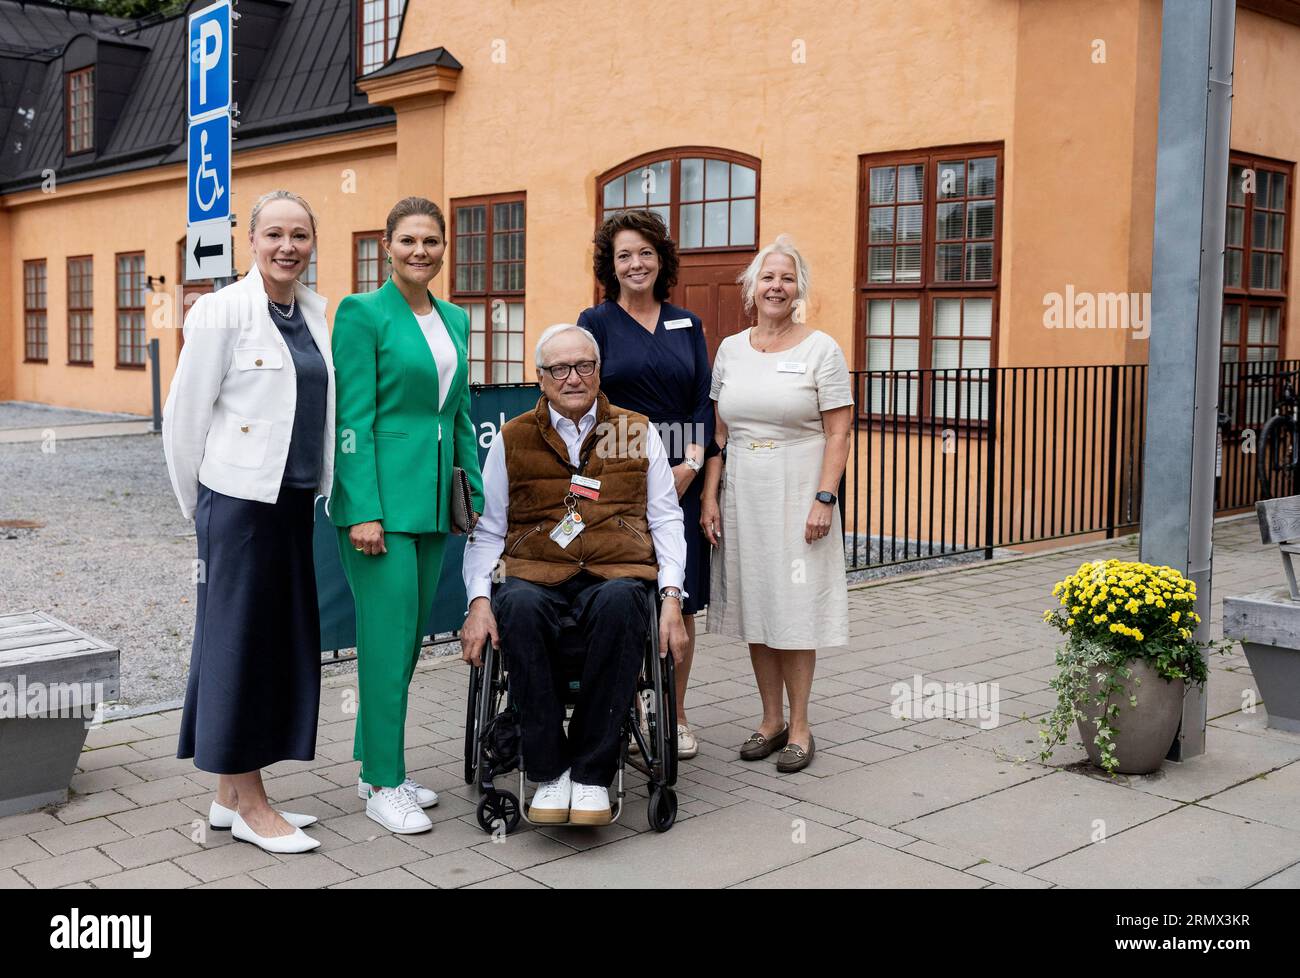 Crown Princess Victoria together with Sofia Palmquist (L), Group CEO Aleris, Claes Hulting, CEO Stiftelsen Spinalis, Helena Ahlskog, Operations Manager Aleris Rehab Station and Annika Törnsten, Operations Manager Aleris Rehab Stationduring a visit to Aleris Rehab Station in Frosundavik outside Stockholm, Sweden August 30, 2023. Photo: Christine Olsson / TT / Kod 10430 Stock Photo